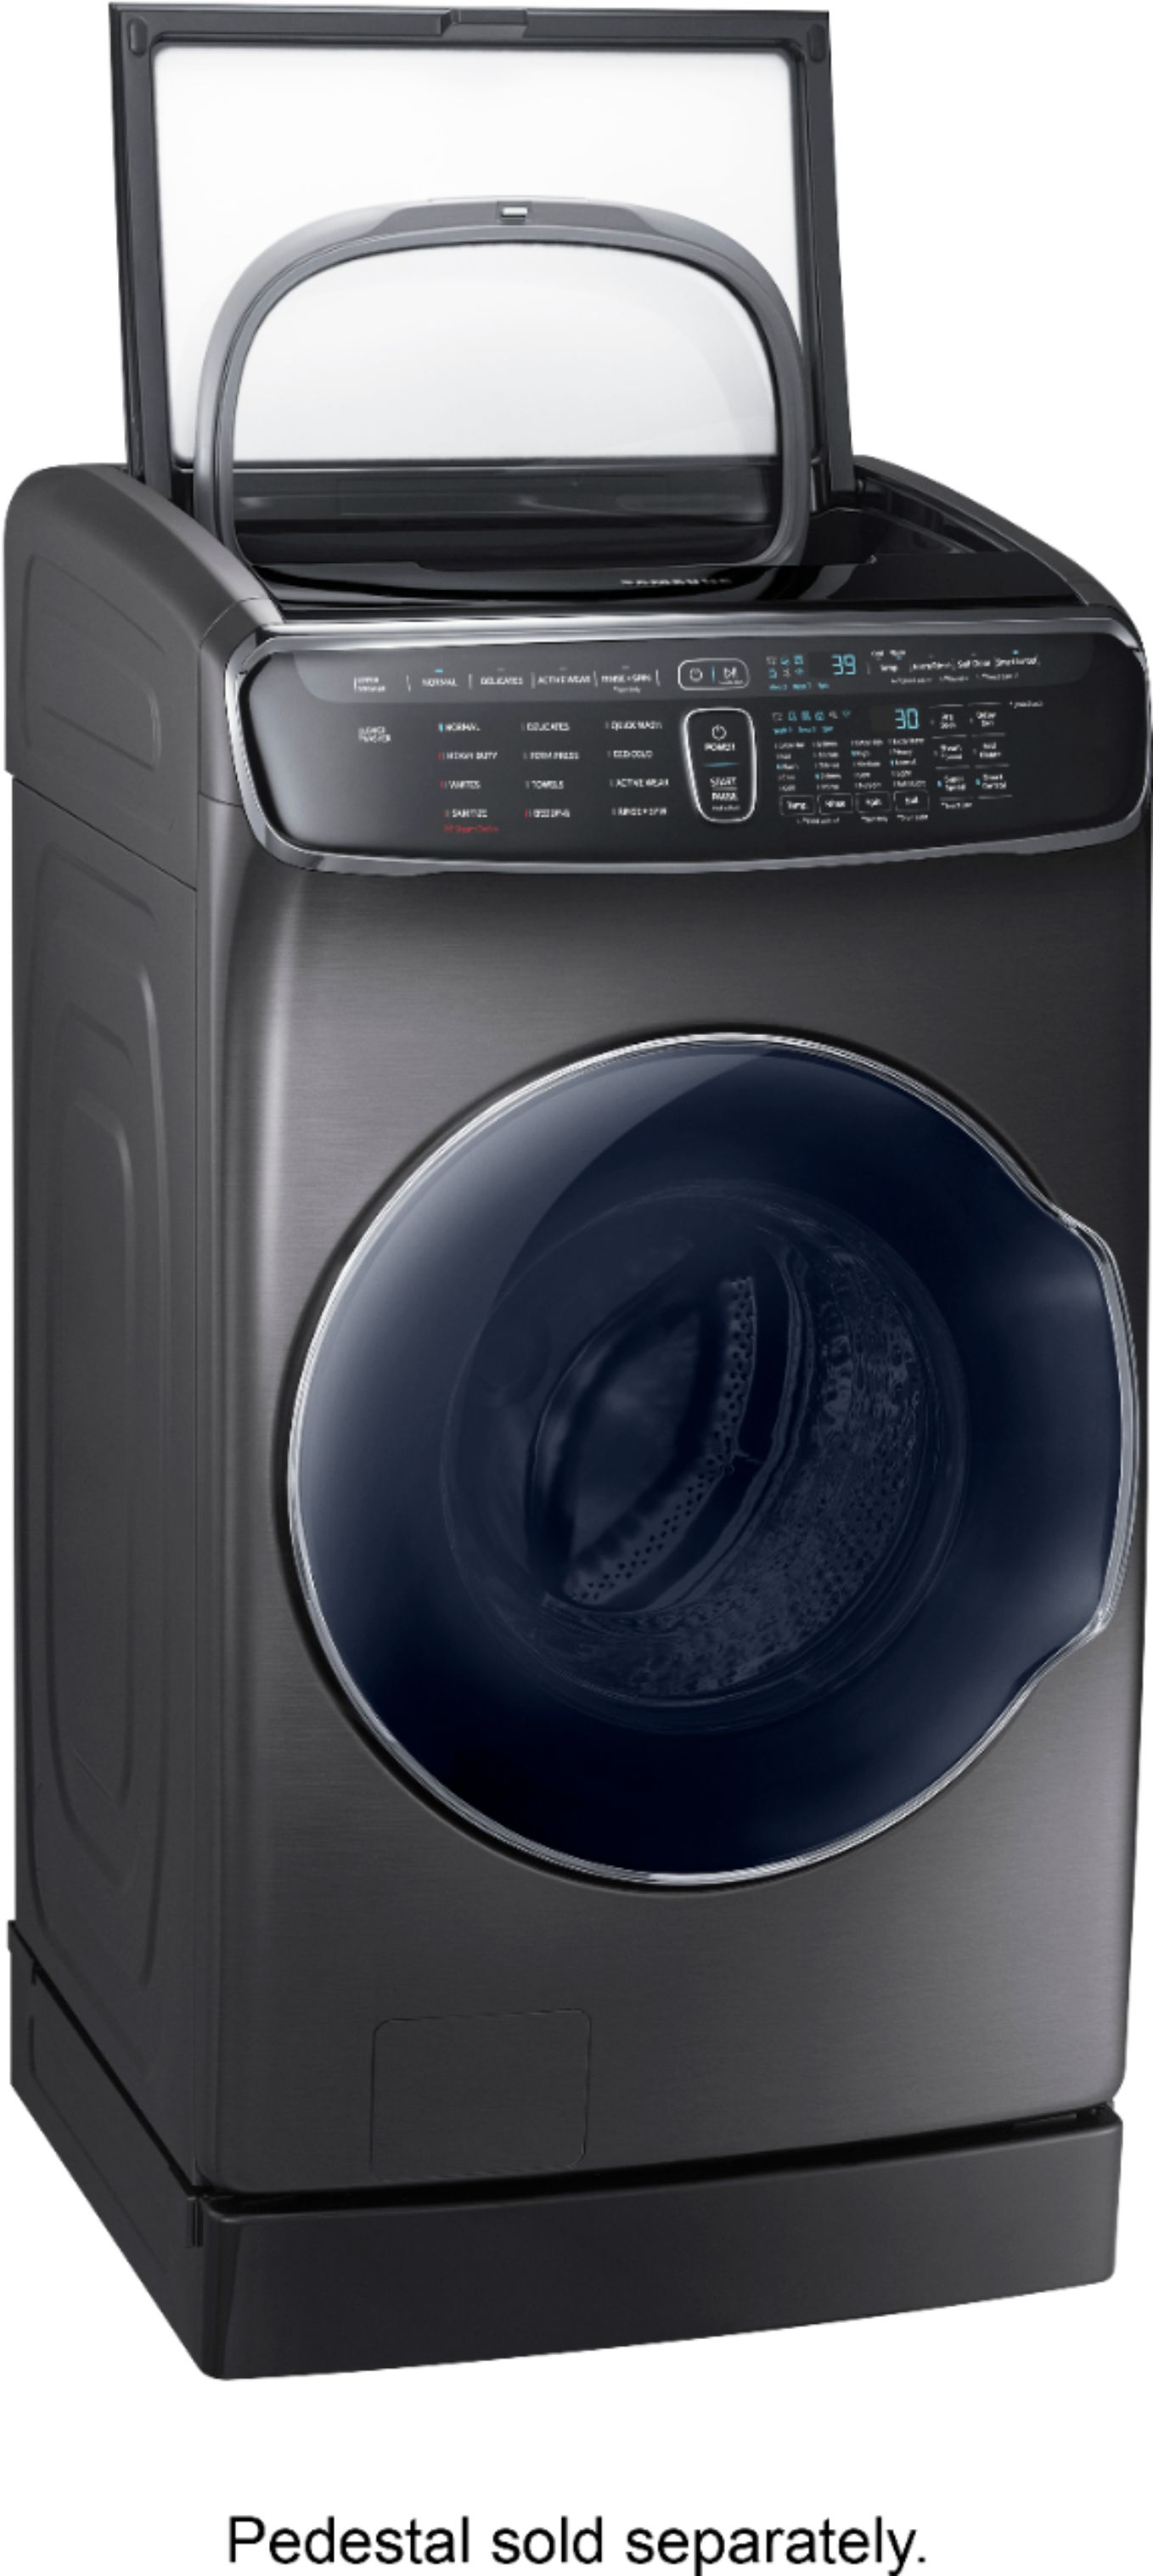 Angle View: Samsung - 6.0 Cu. Ft. High-Efficiency Smart Front Load Washer with Steam and FlexWash - Black stainless steel